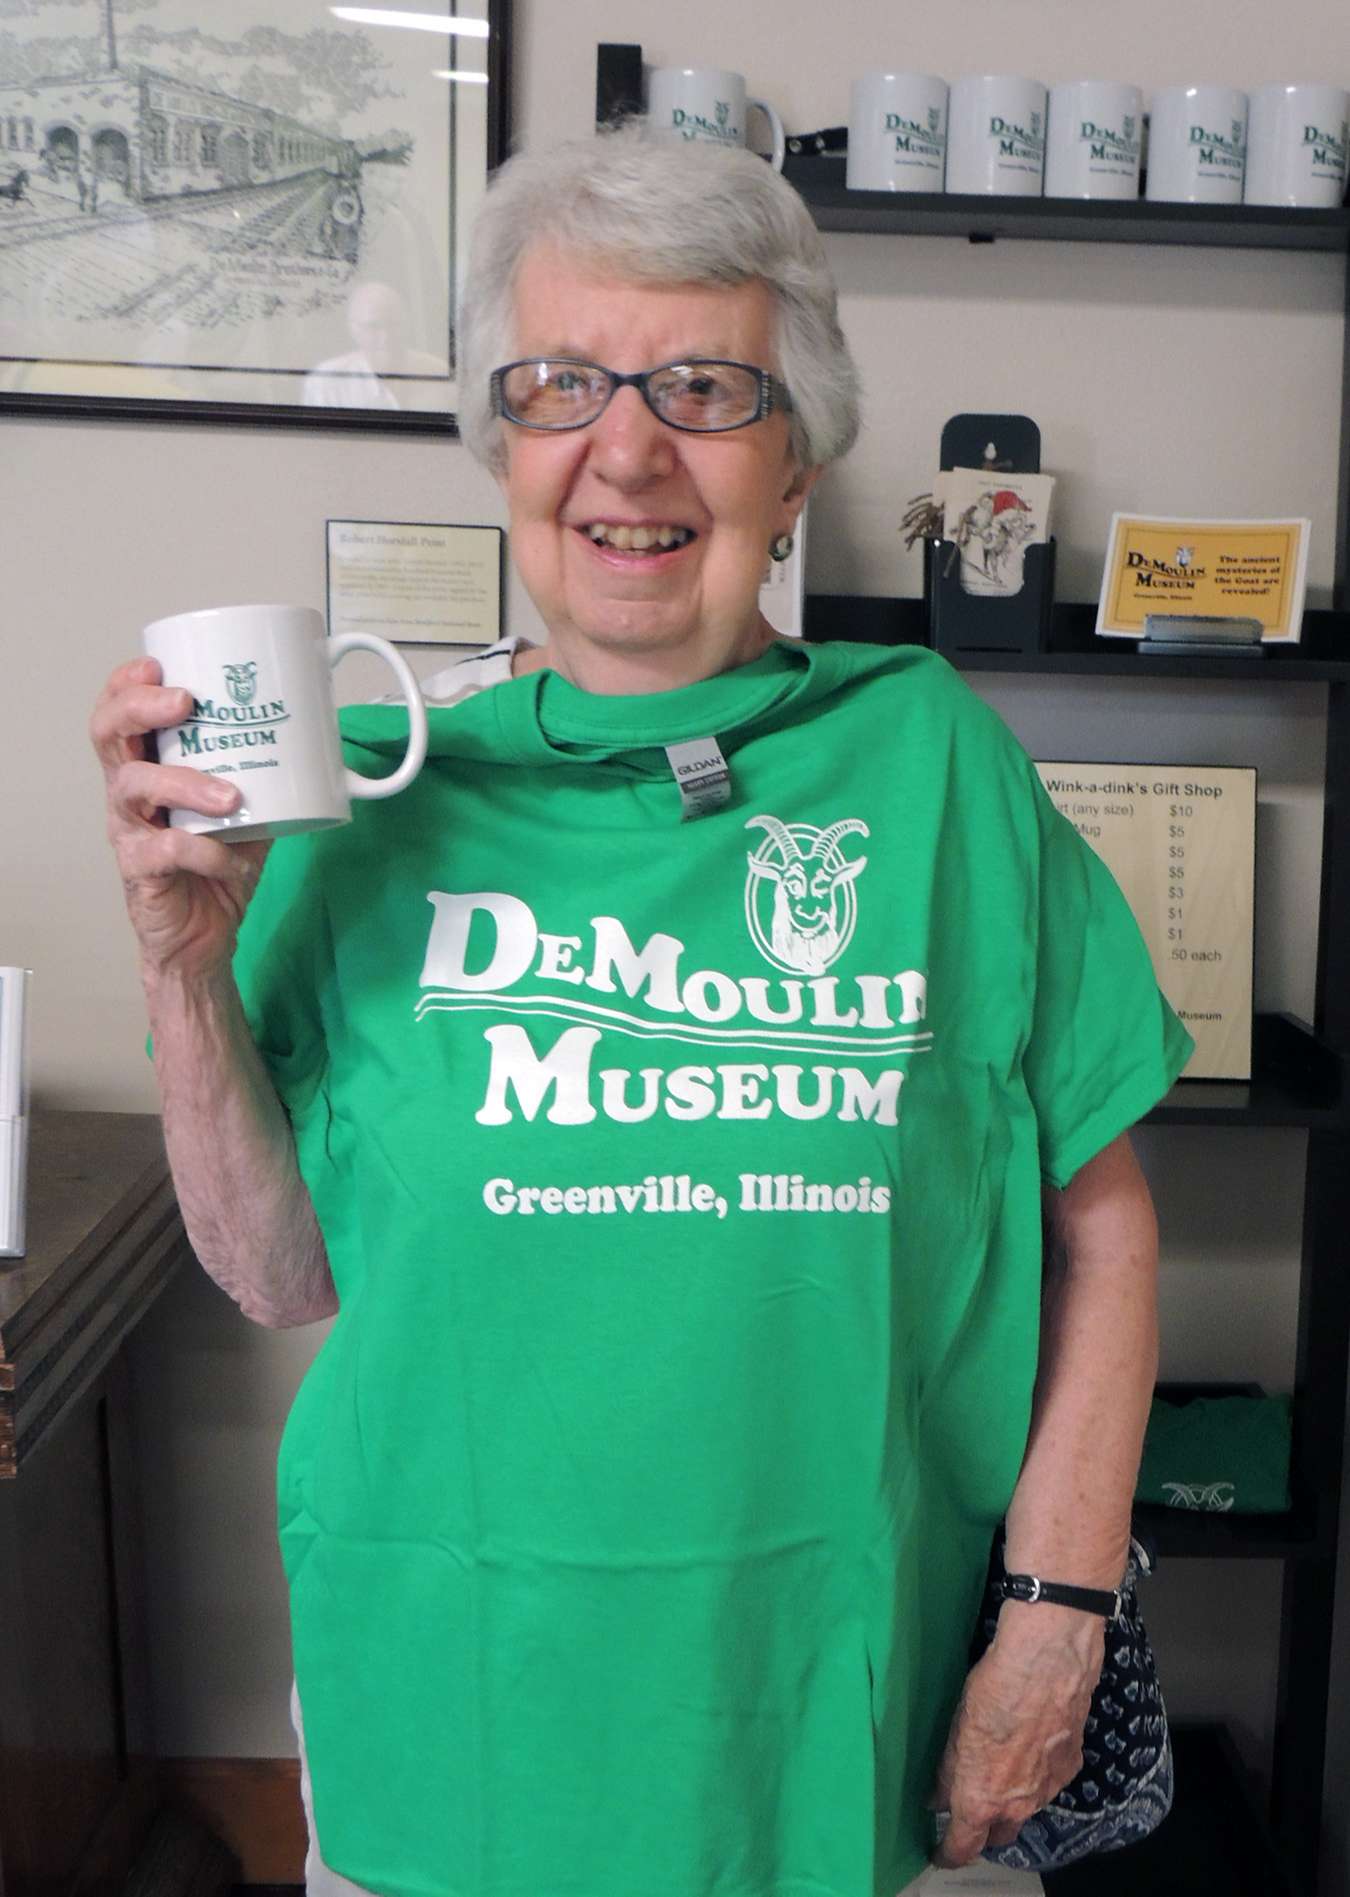 Smiling woman with white hair and eyeglasses holds white mug and green tee shirt